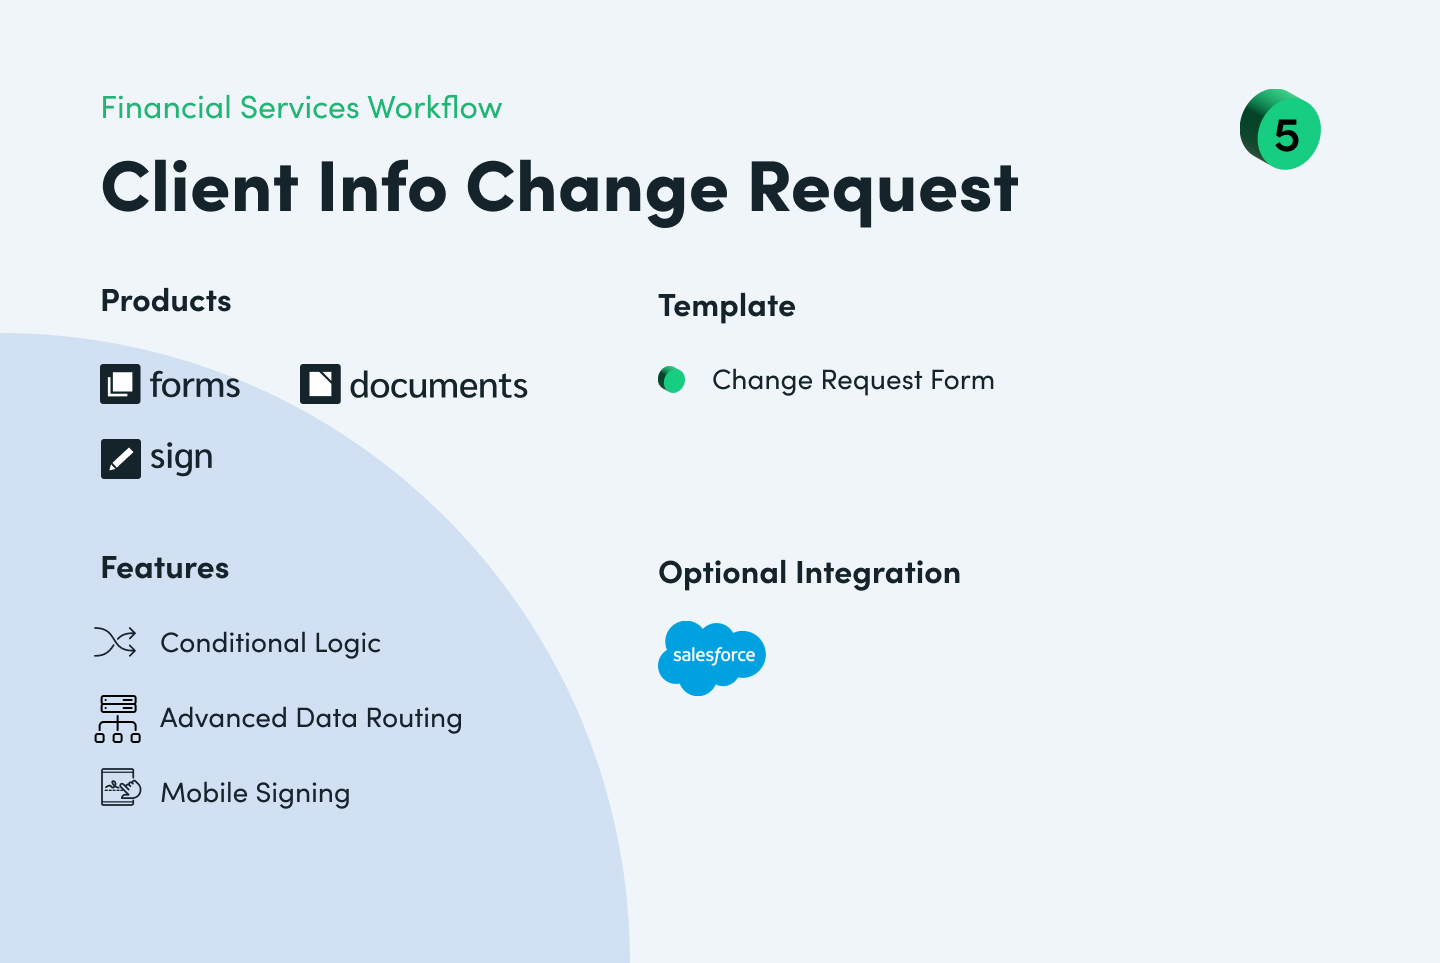 Financial Services Client Info Change Request Workflow Example